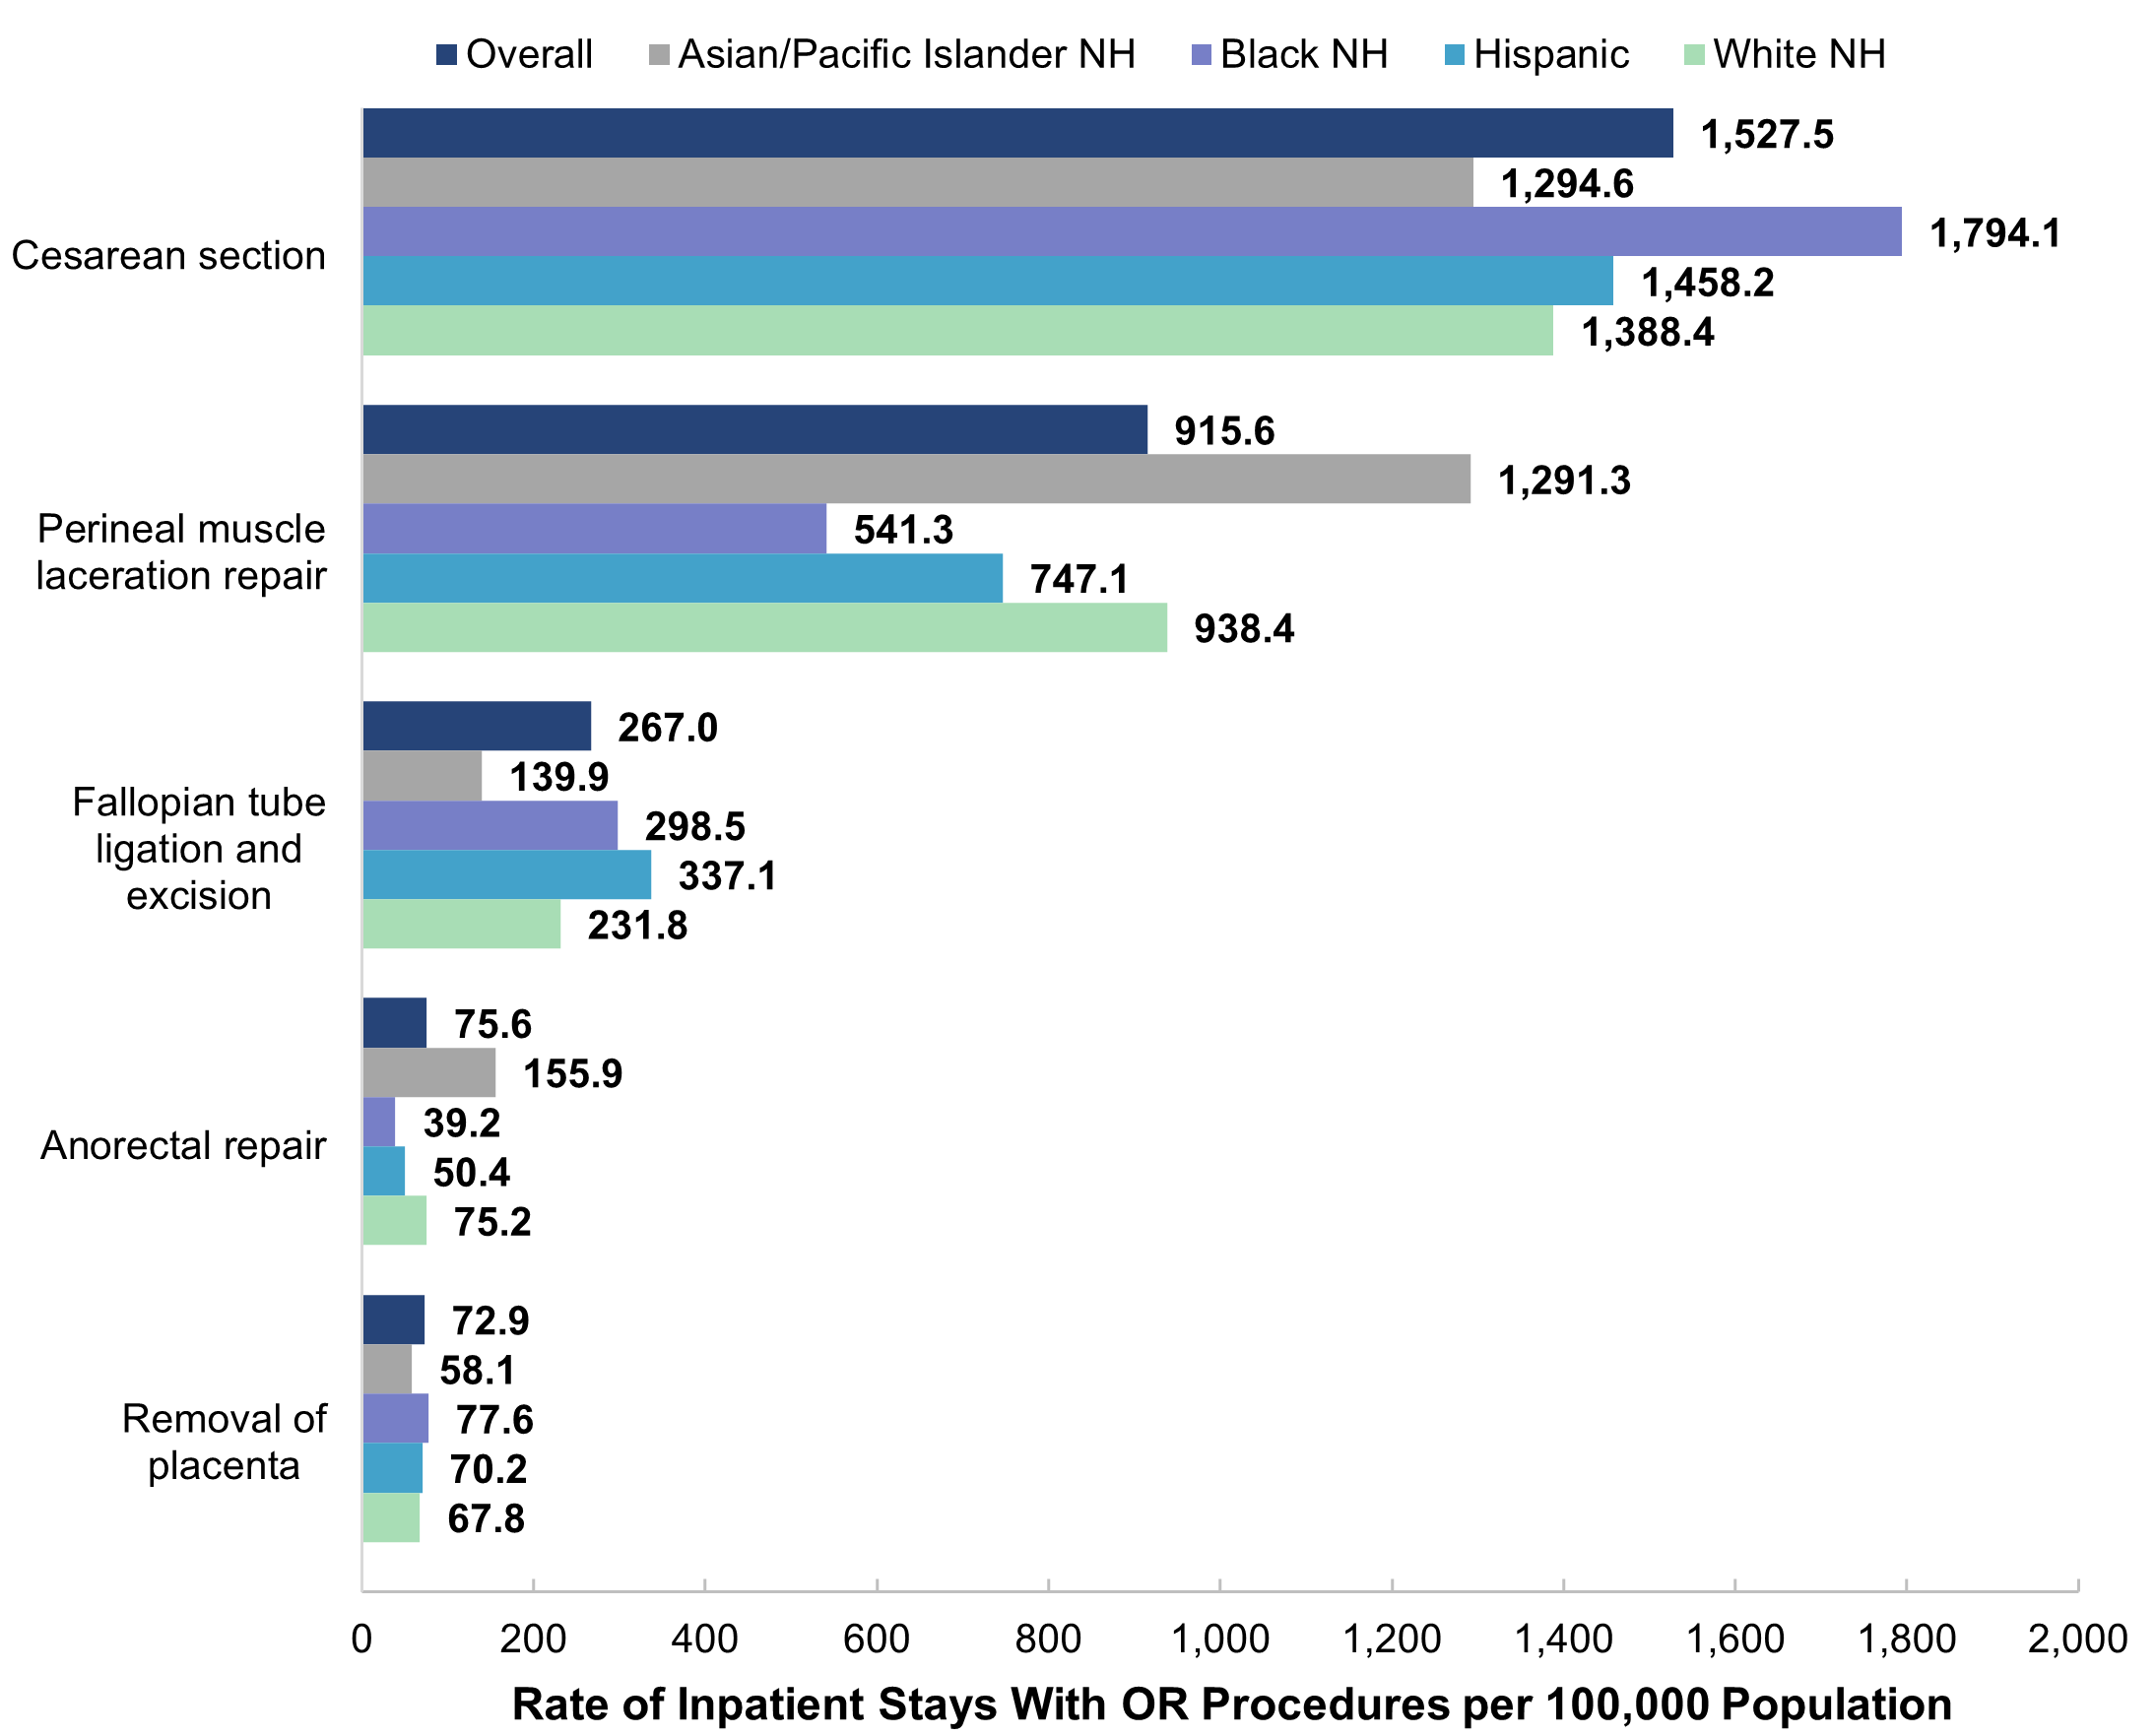 Bar chart showing the rate per 100,000 population of maternal stays with the five most common 
					operating room (OR) procedures by patient race and ethnicity (Asian/Pacific Islander [API] non-Hispanic 
					[NH], Black NH, Hispanic, White NH) in 2019. Cesarean section: overall (1,527.5), API NH (1,294.6), 
					Black NH (1,794.1), Hispanic (1,458.2), White NH (1,388.4). Perineal muscle laceration repair: overall 
					(915.6), API NH (1,291.3), Black NH (541.3), Hispanic (747.1), White NH (938.4). Fallopian tube ligation 
					and excision: overall (267.0), API NH (139.9), Black NH (298.5), Hispanic (337.1), White NH (231.8). 
					Anorectal repair: overall (75.6), API NH (155.9), Black NH (39.2), Hispanic (50.4), White NH (75.2). 
					Removal of placenta: overall (72.9), API NH (58.1), Black NH (77.6), Hispanic (70.2), White NH (67.8).